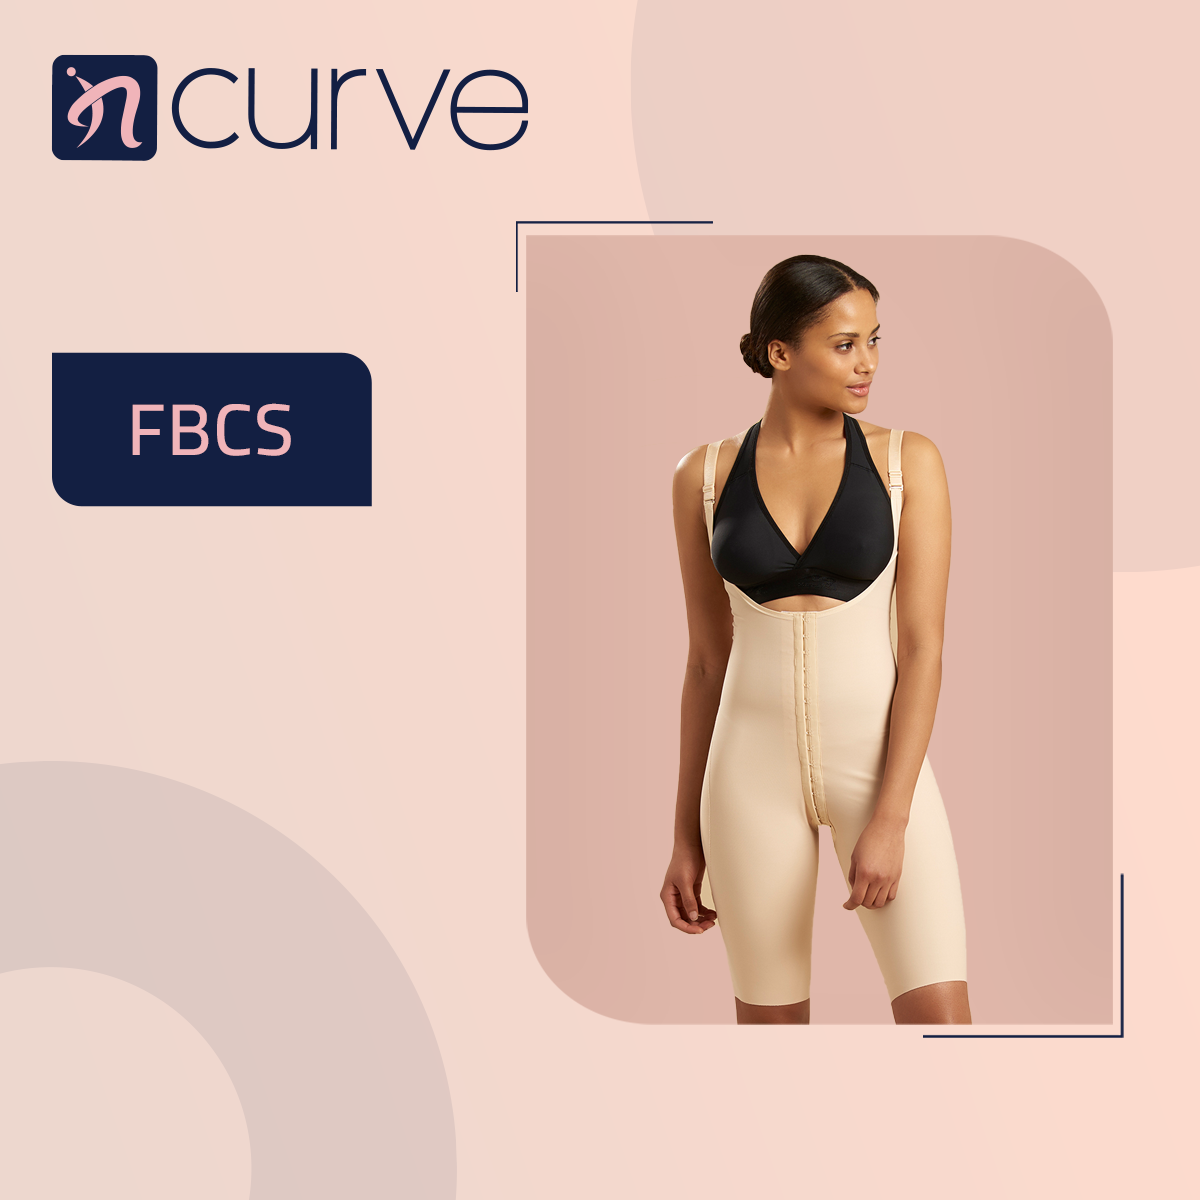 COMPRESSION BODYSUIT FOR BBL FAT TRANSFER - THIGH LENGTH - STYLE NO. FBCS -  incurve